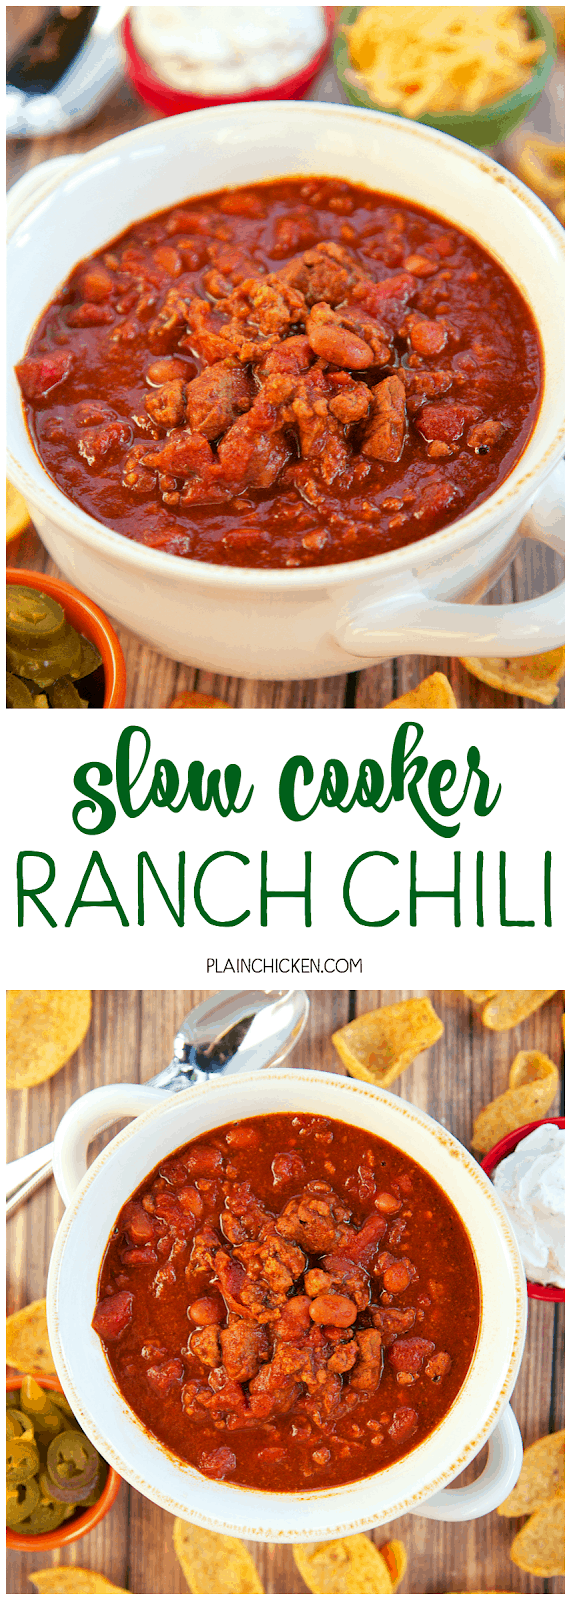 Slow Cooker Ranch Chili - THE ULTIMATE chili recipe!! Ground beef, stew meat, diced tomatoes, Rotel tomatoes, chili beans, beef broth, tomato paste, chili powder, cumin, garlic and Ranch dressing mix. This has all the best from all of my chili recipes. It is the BEST chili recipe! Great for a crowd! Serve with some cornbread for a quick and easy meal!